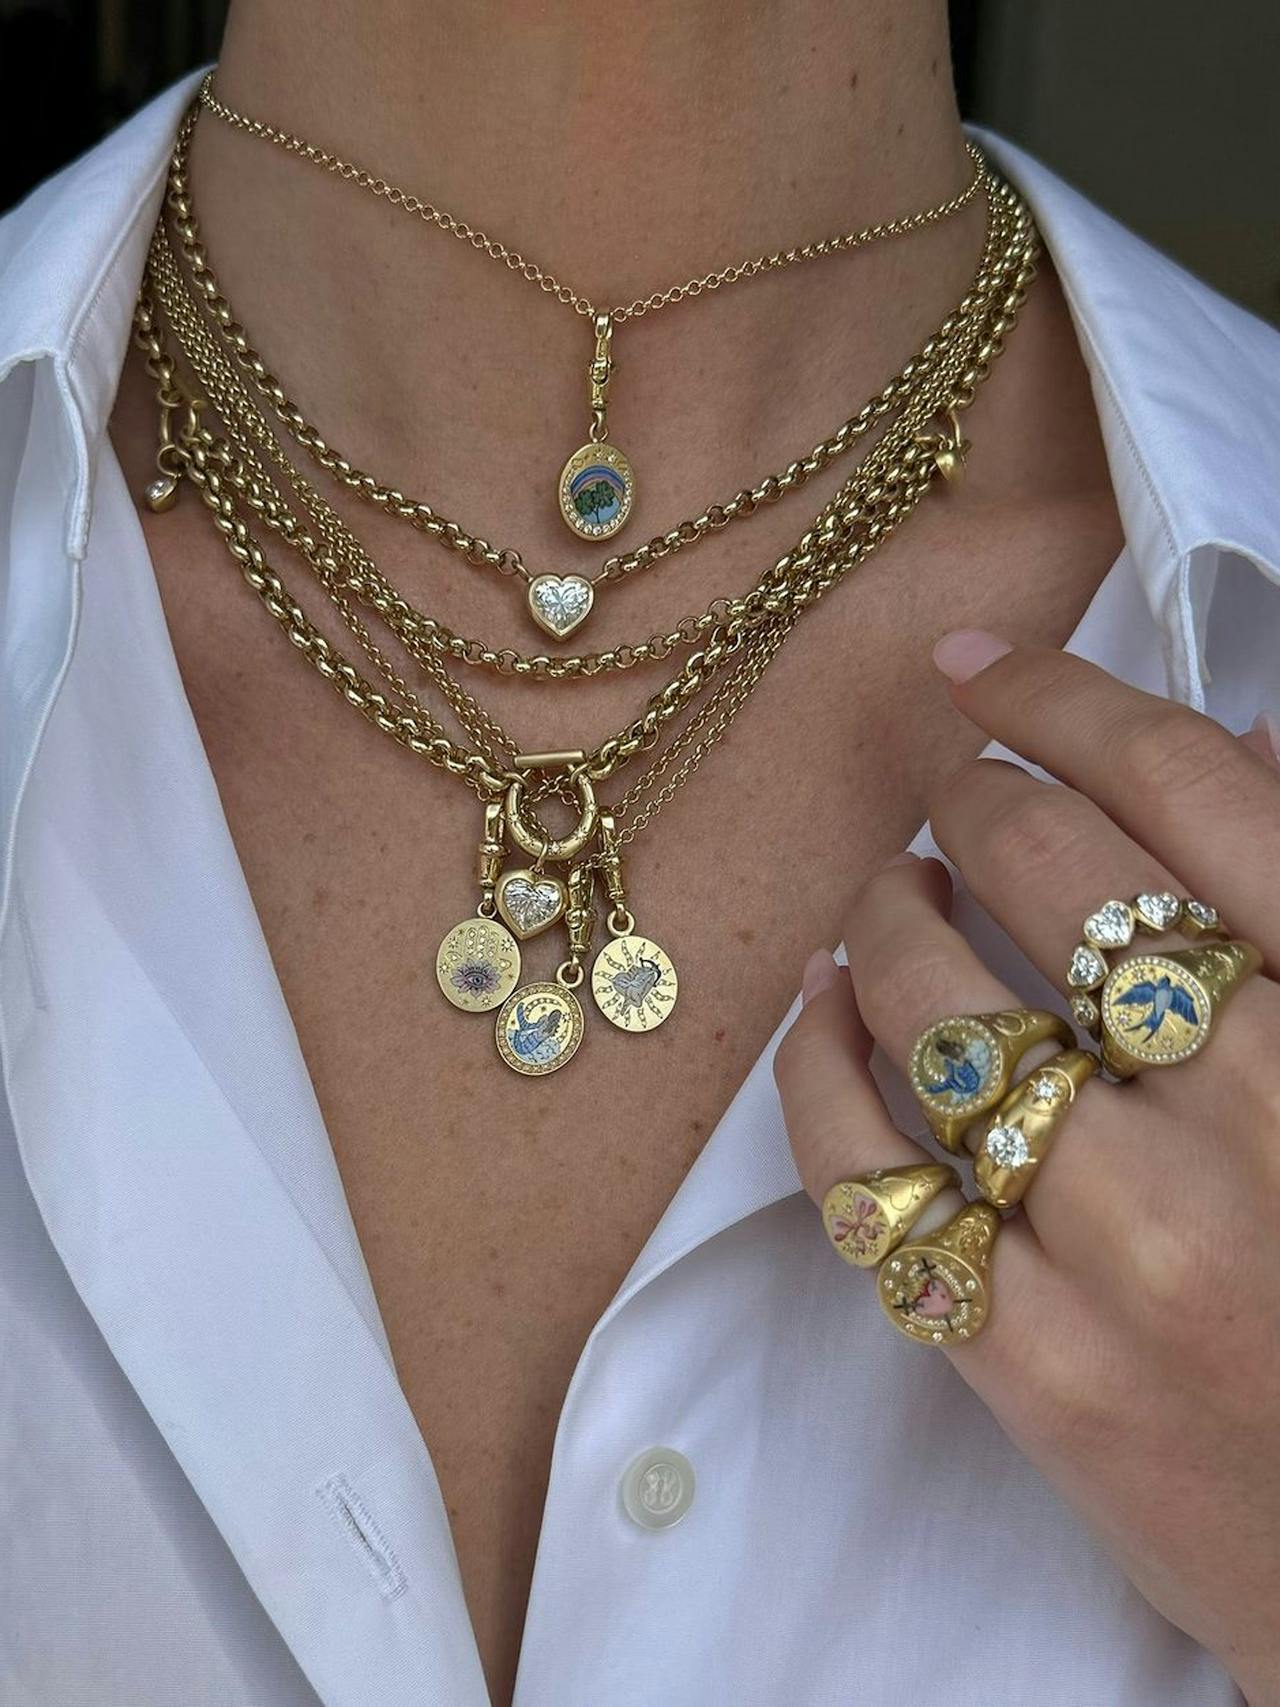 Discover ethereal heirloom jewellery on Collagerie. Handcrafted in London, Cece Jewellery decorates gold pendants and signet rings with hand-painted enamel artworks, intricate engravings and precious stones | Collagerie.com